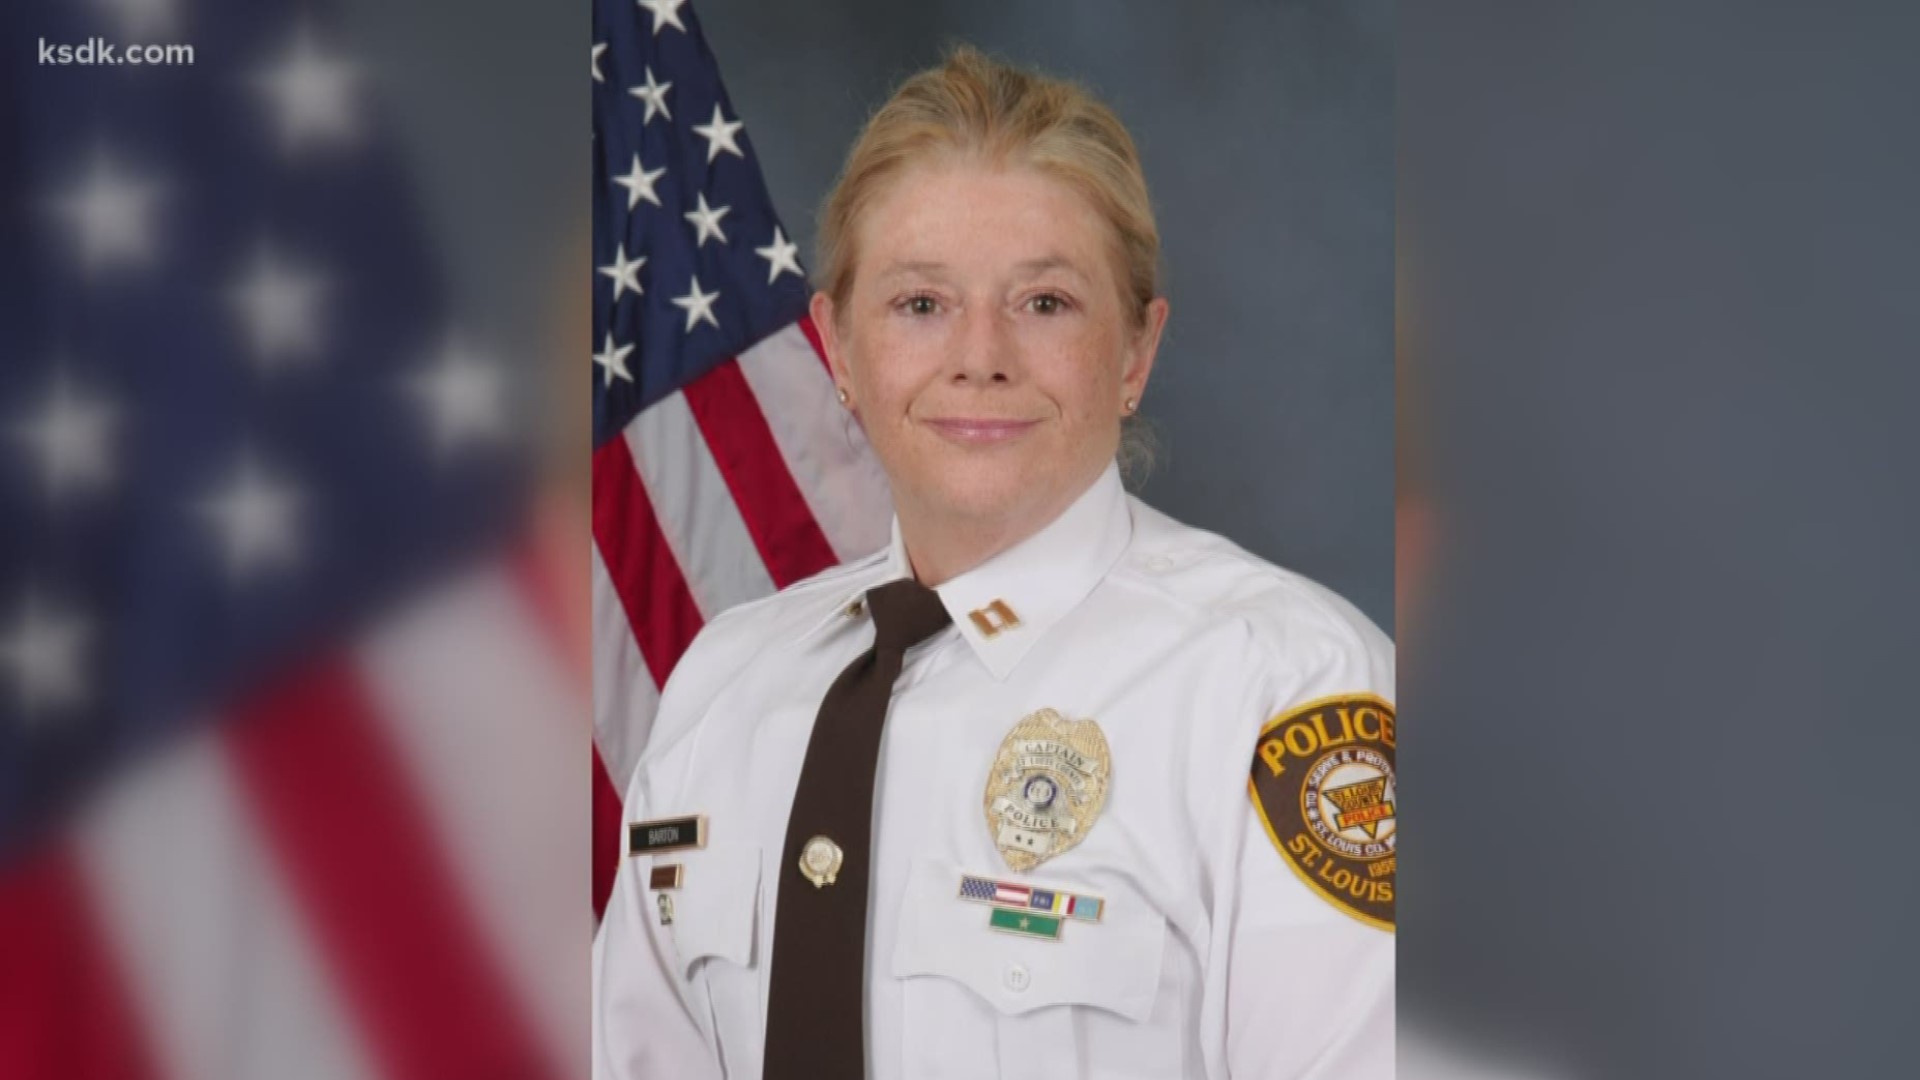 West County Precinct Captain Mary Barton was selected from eight candidates to become next chief of St. Louis County Police Department